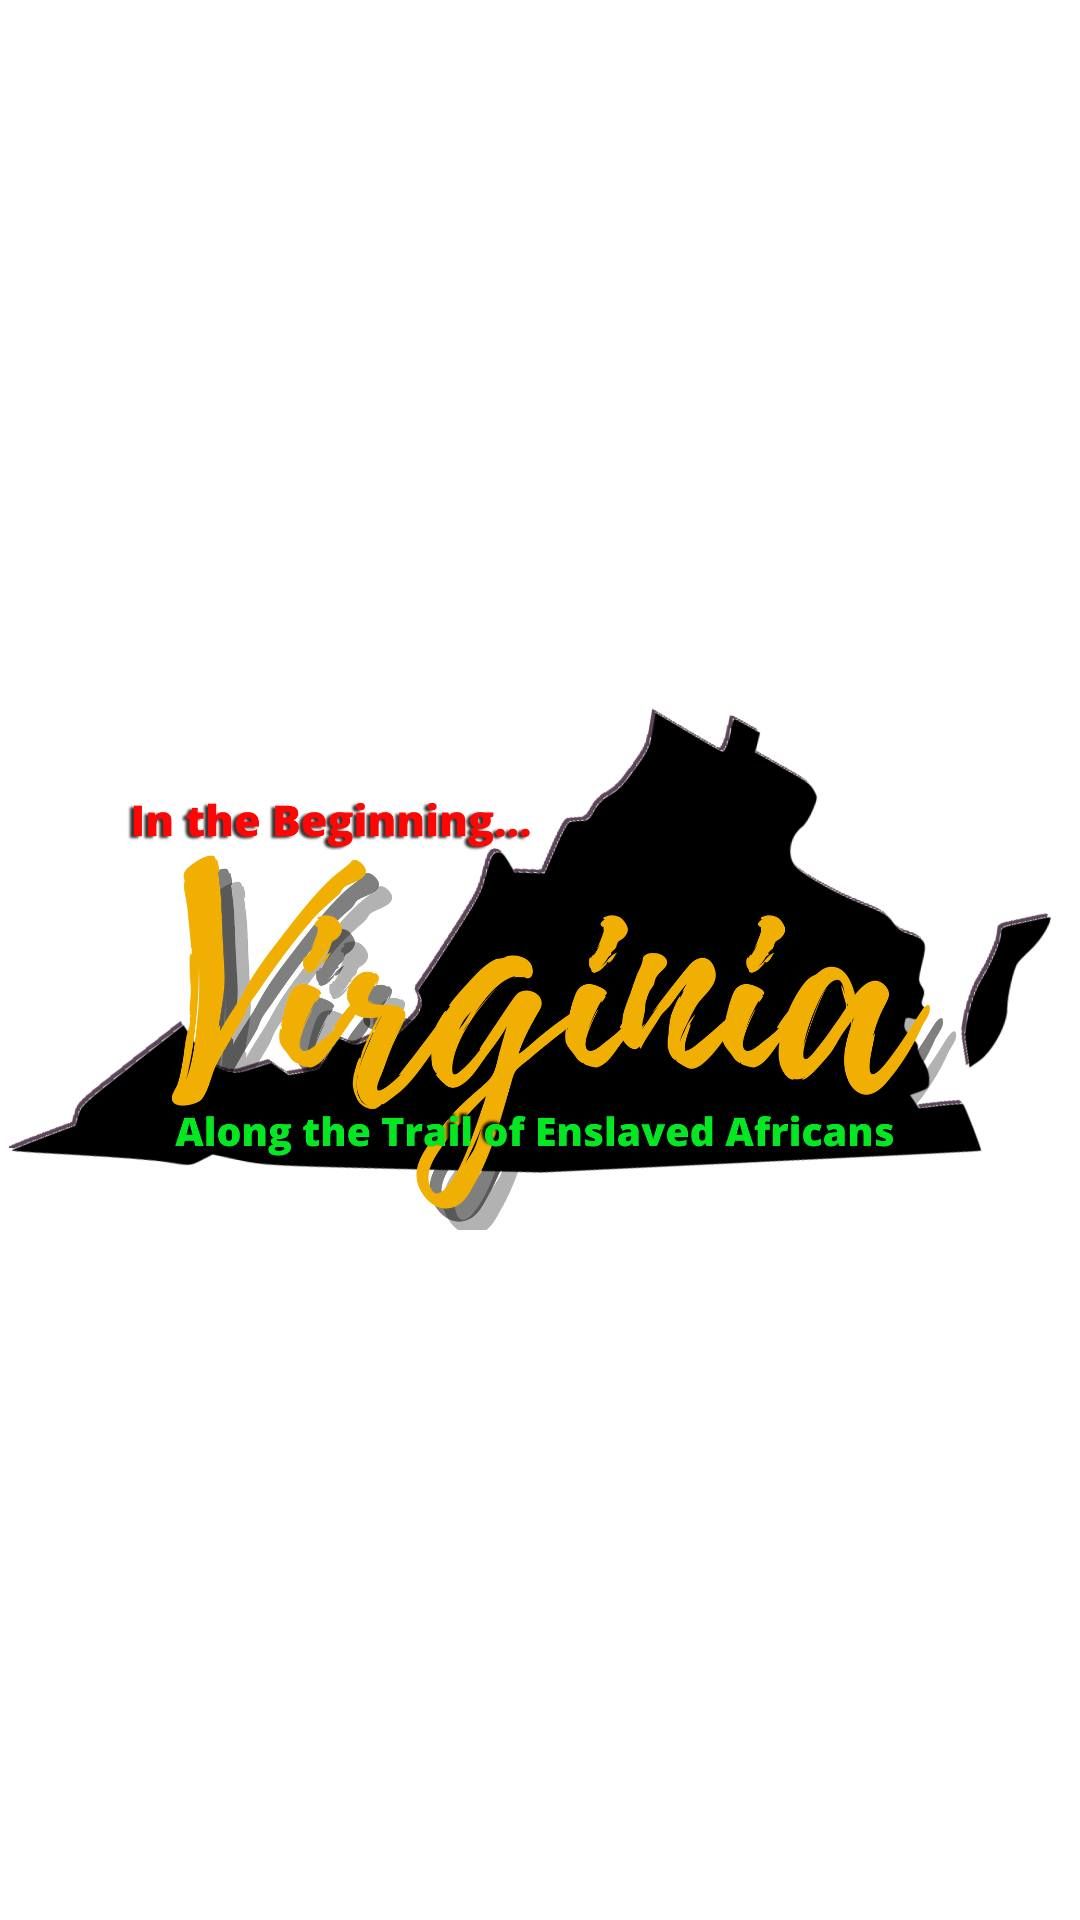 In the Beginning\u2026Virginia, Along the Trail of Enslaved Africans